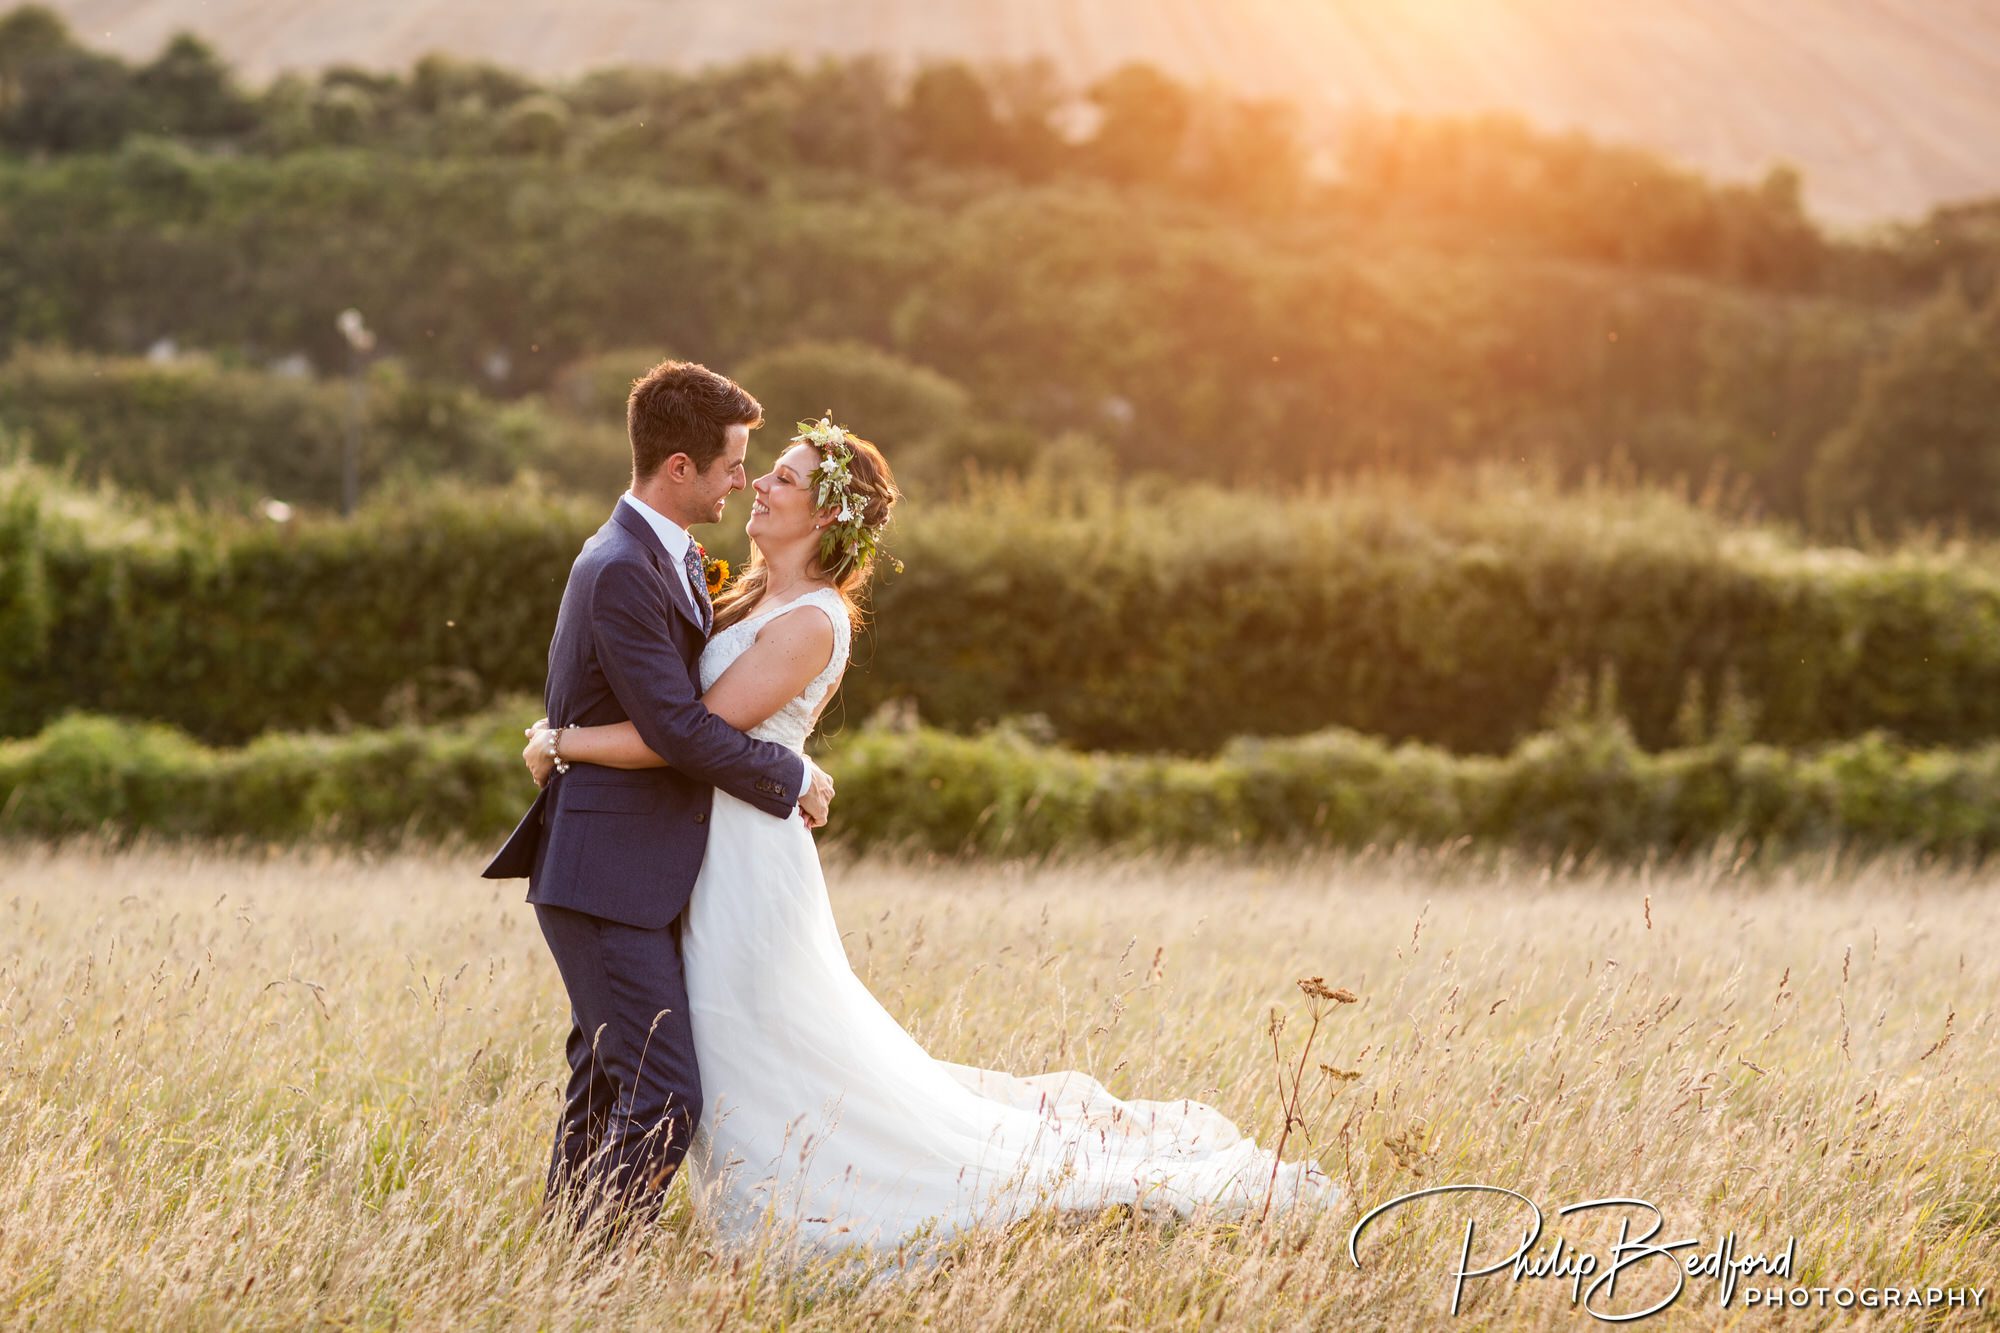 Preview Emma  Joseph Pangdean Old Barn Wedding Pyecombe Brighton Sussex